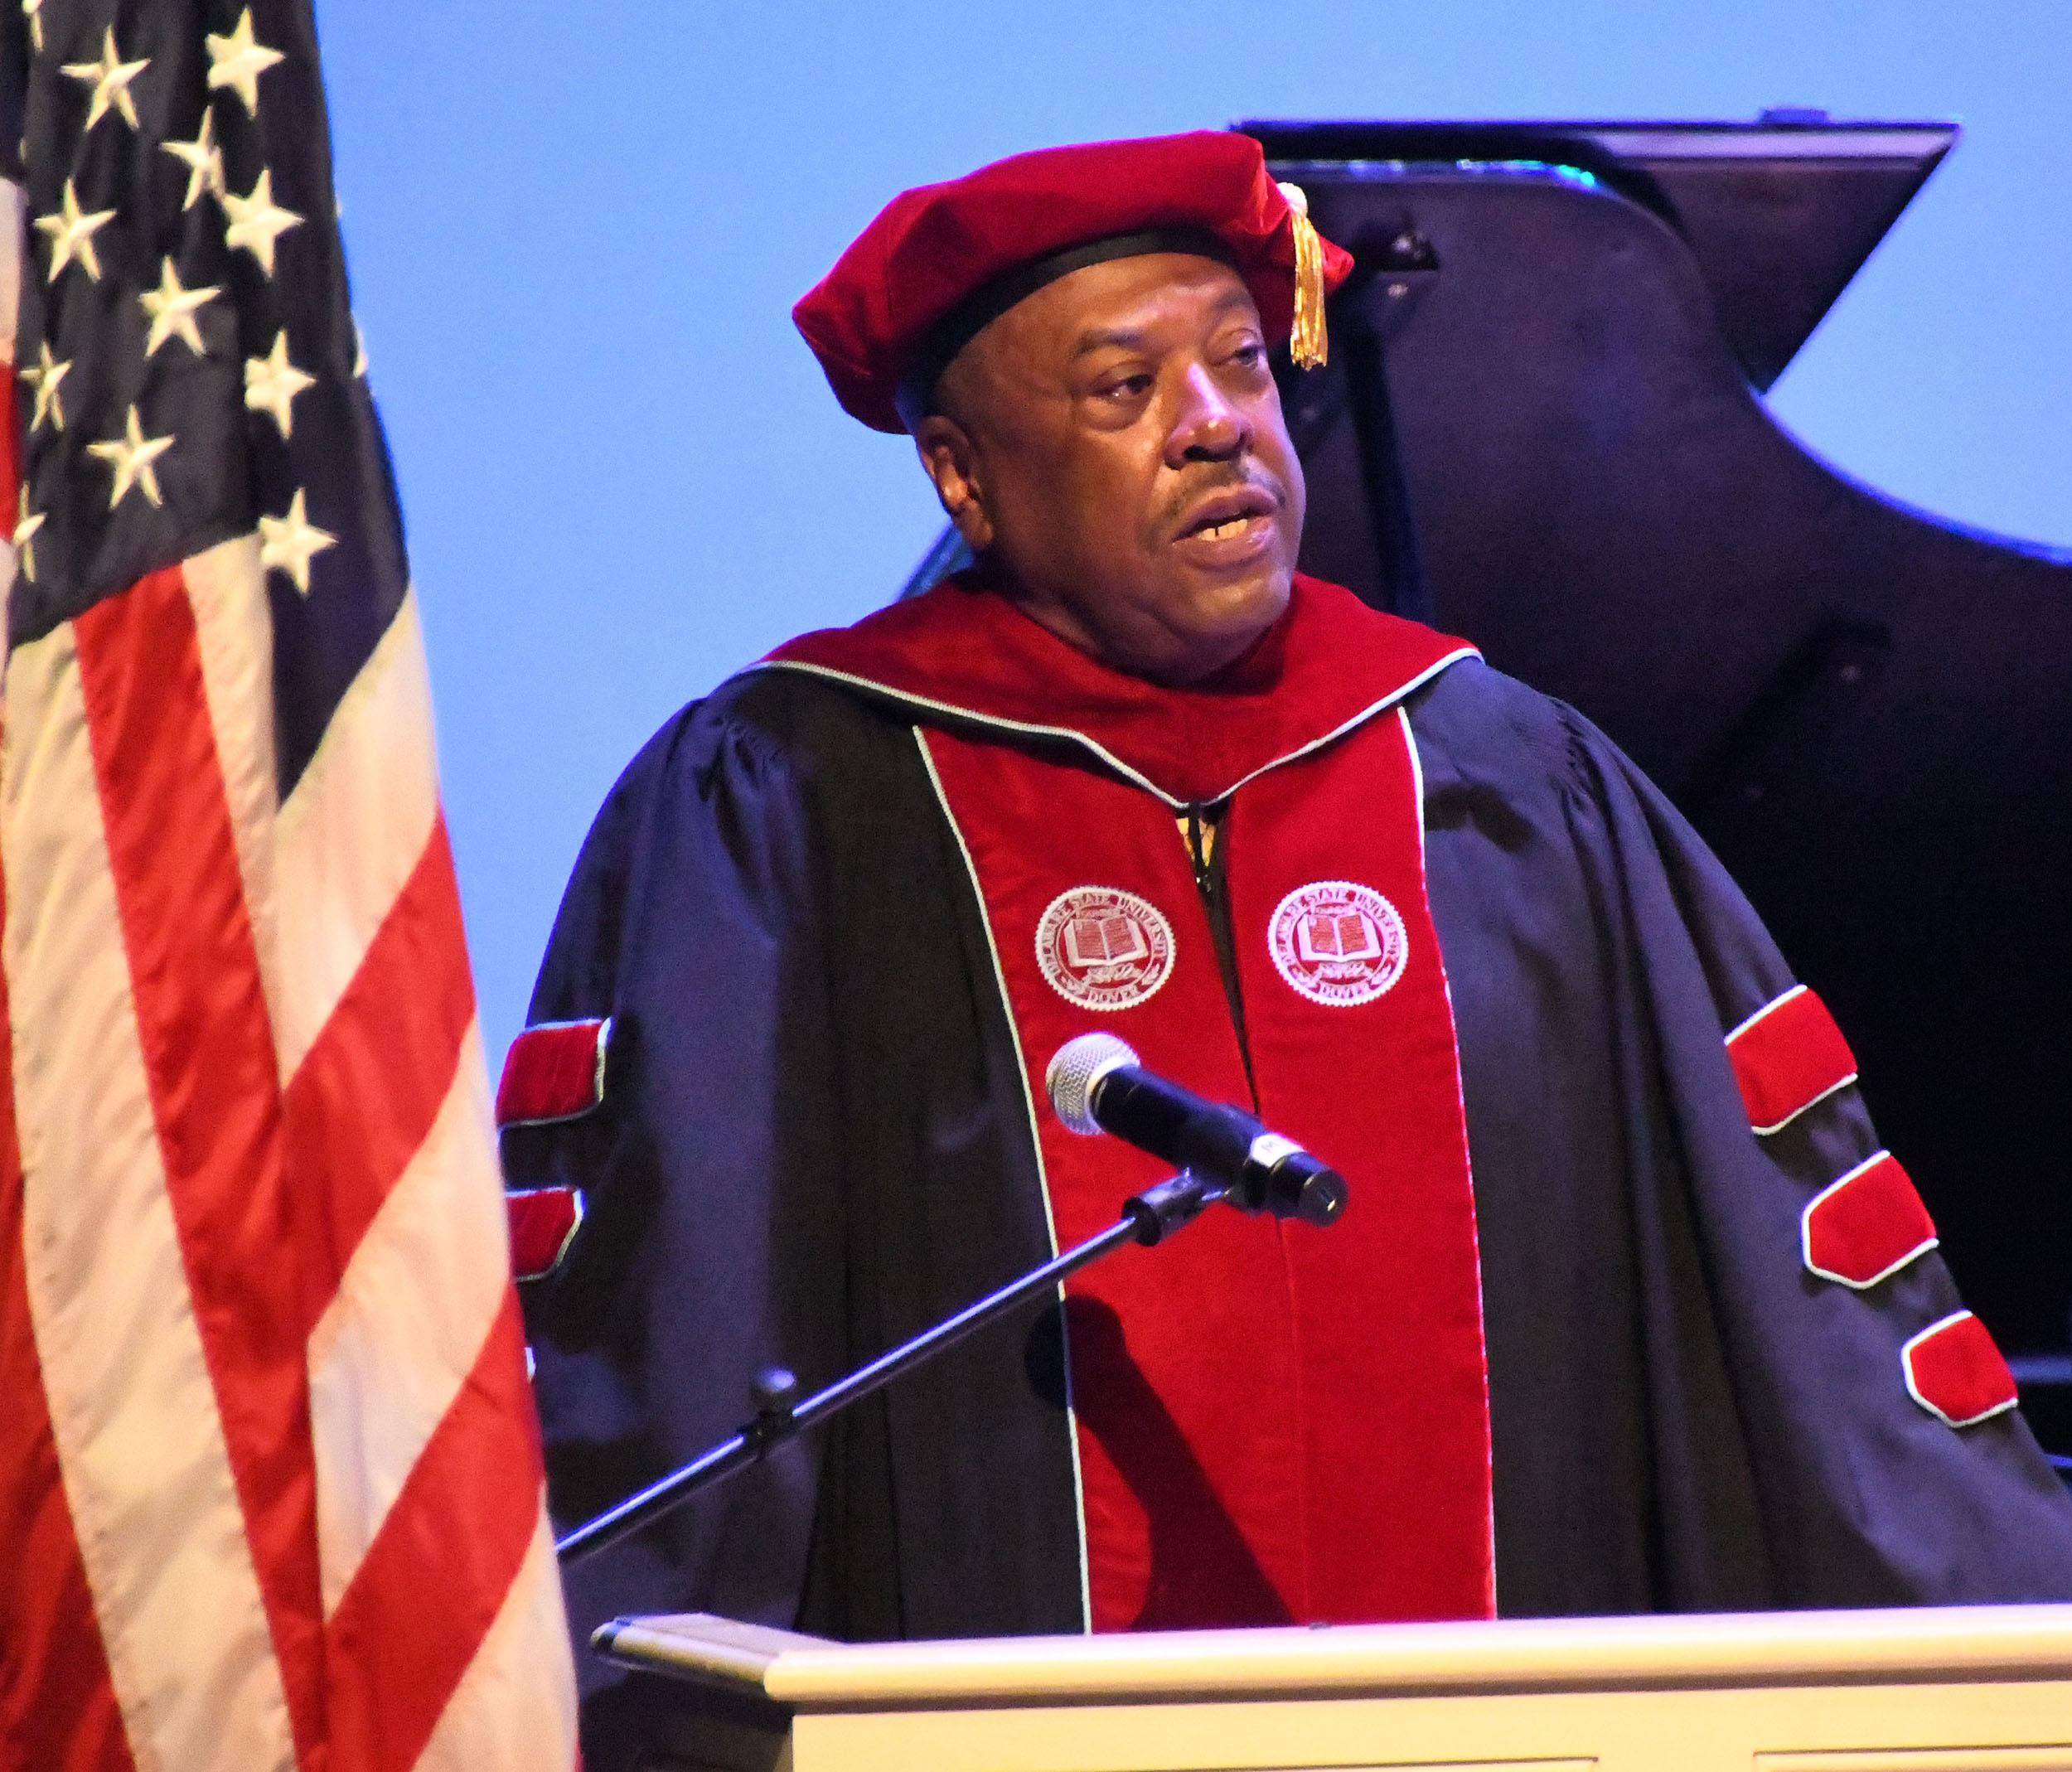 Keynote speaker John Ridgeway recalled his experiences as a young freshman at then-Delaware State College. 